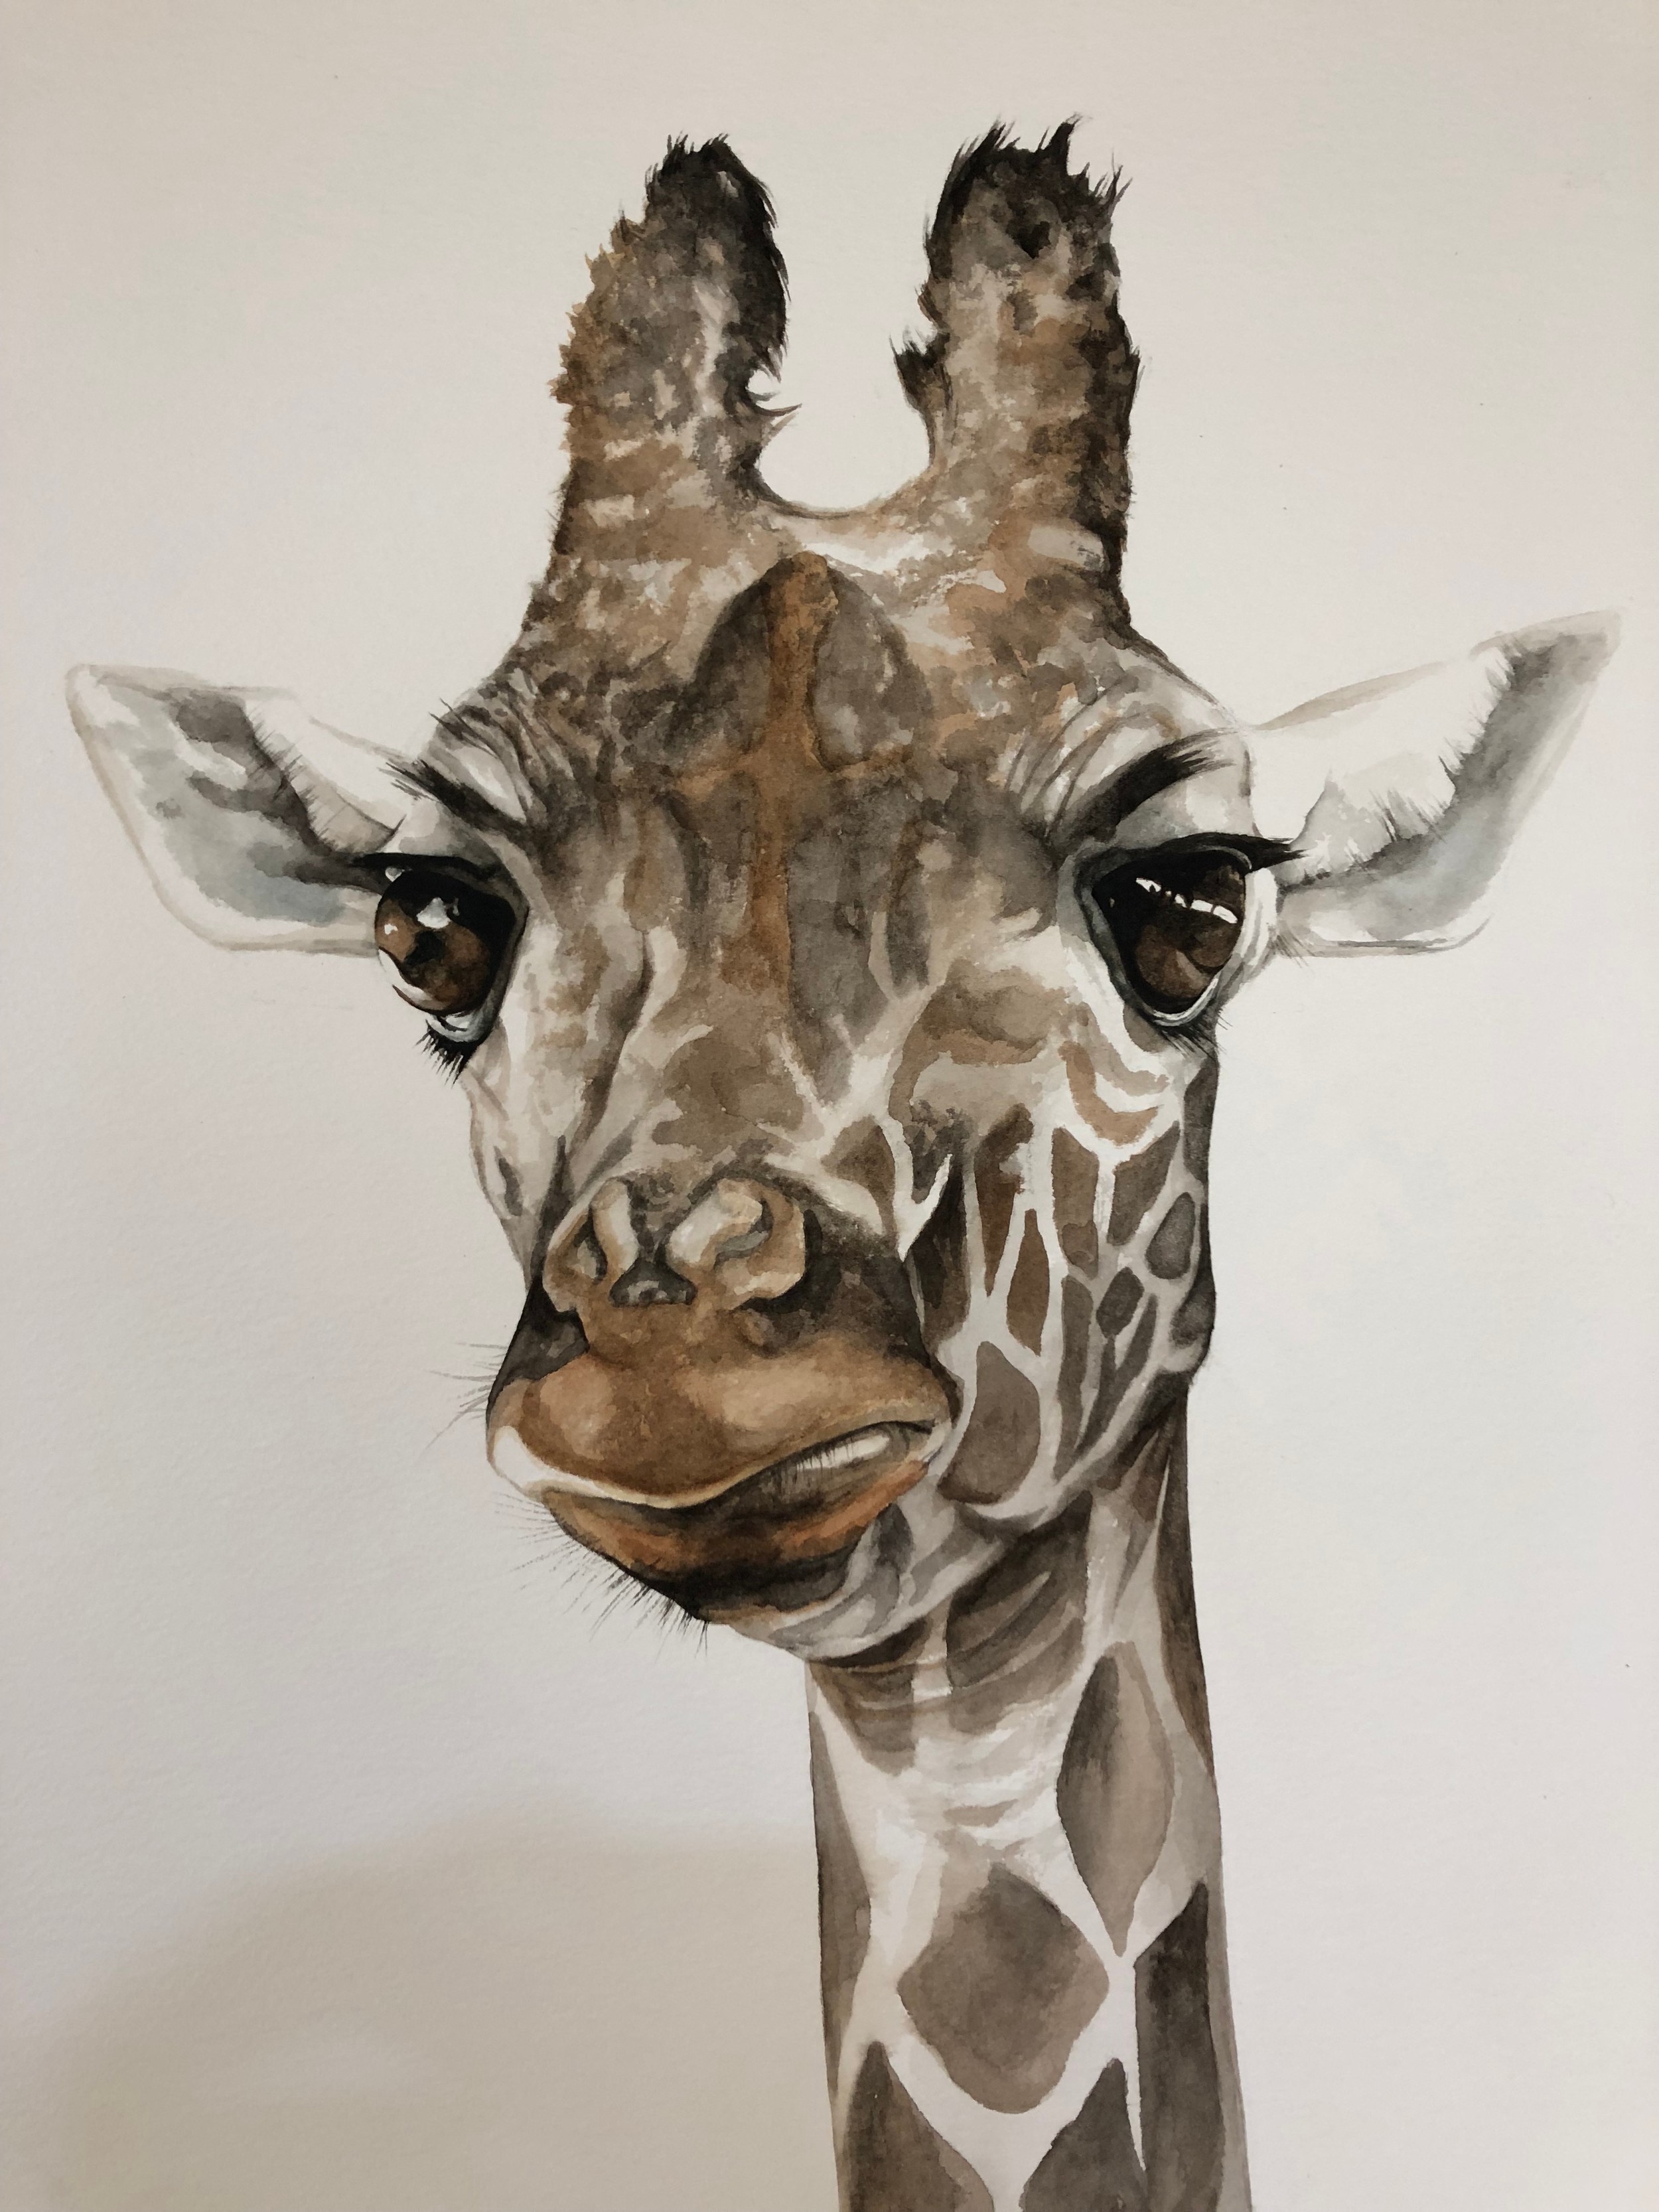 Dominique Salm (b.1972) 'Giraffe', watercolour on paper, signed in pencil below, 76.5 x 47 cm, - Image 3 of 3